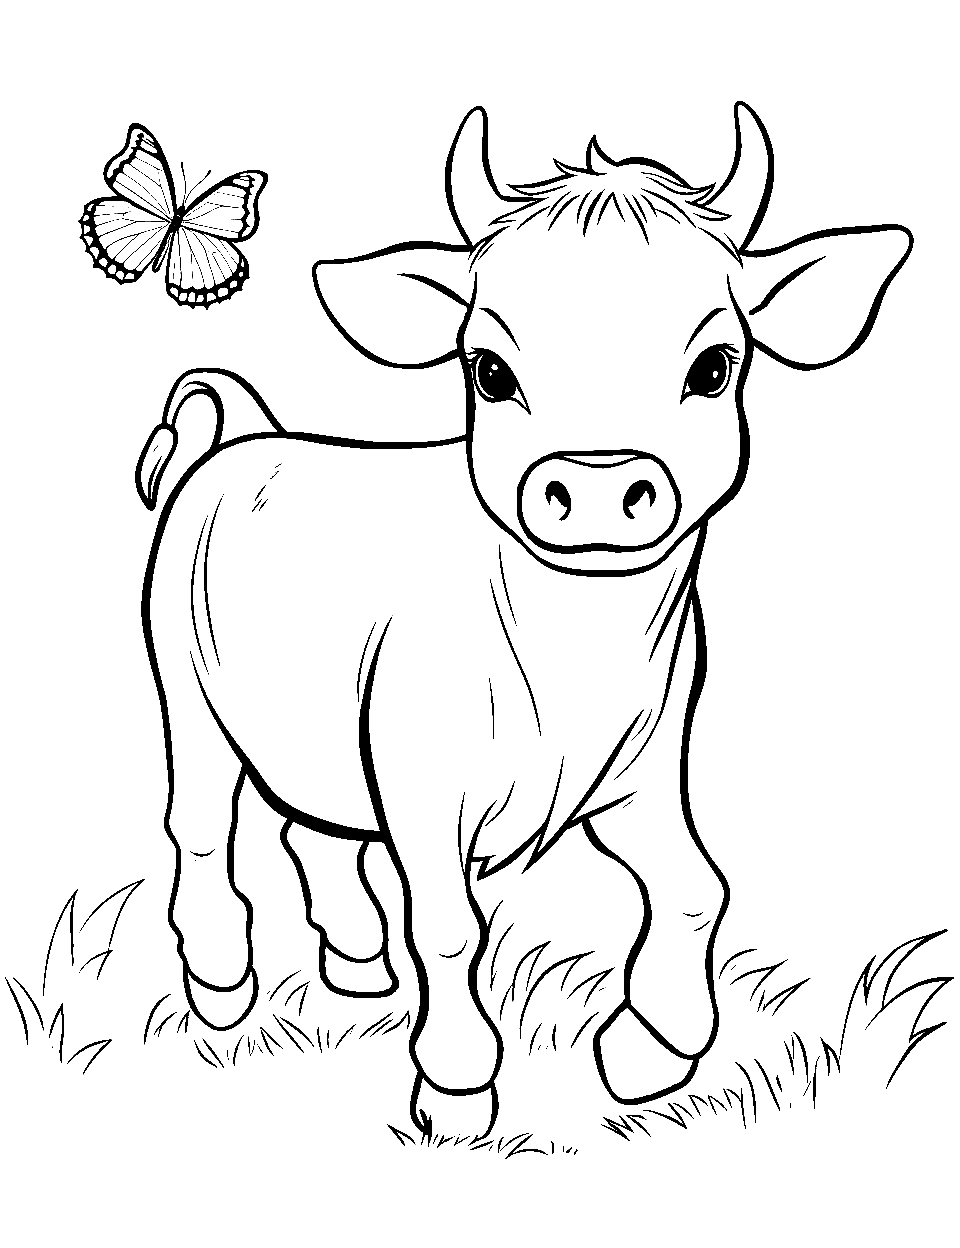 Calf and Colorful Butterfly Coloring Page - A curious, vibrantly colored butterfly flying around a calf.